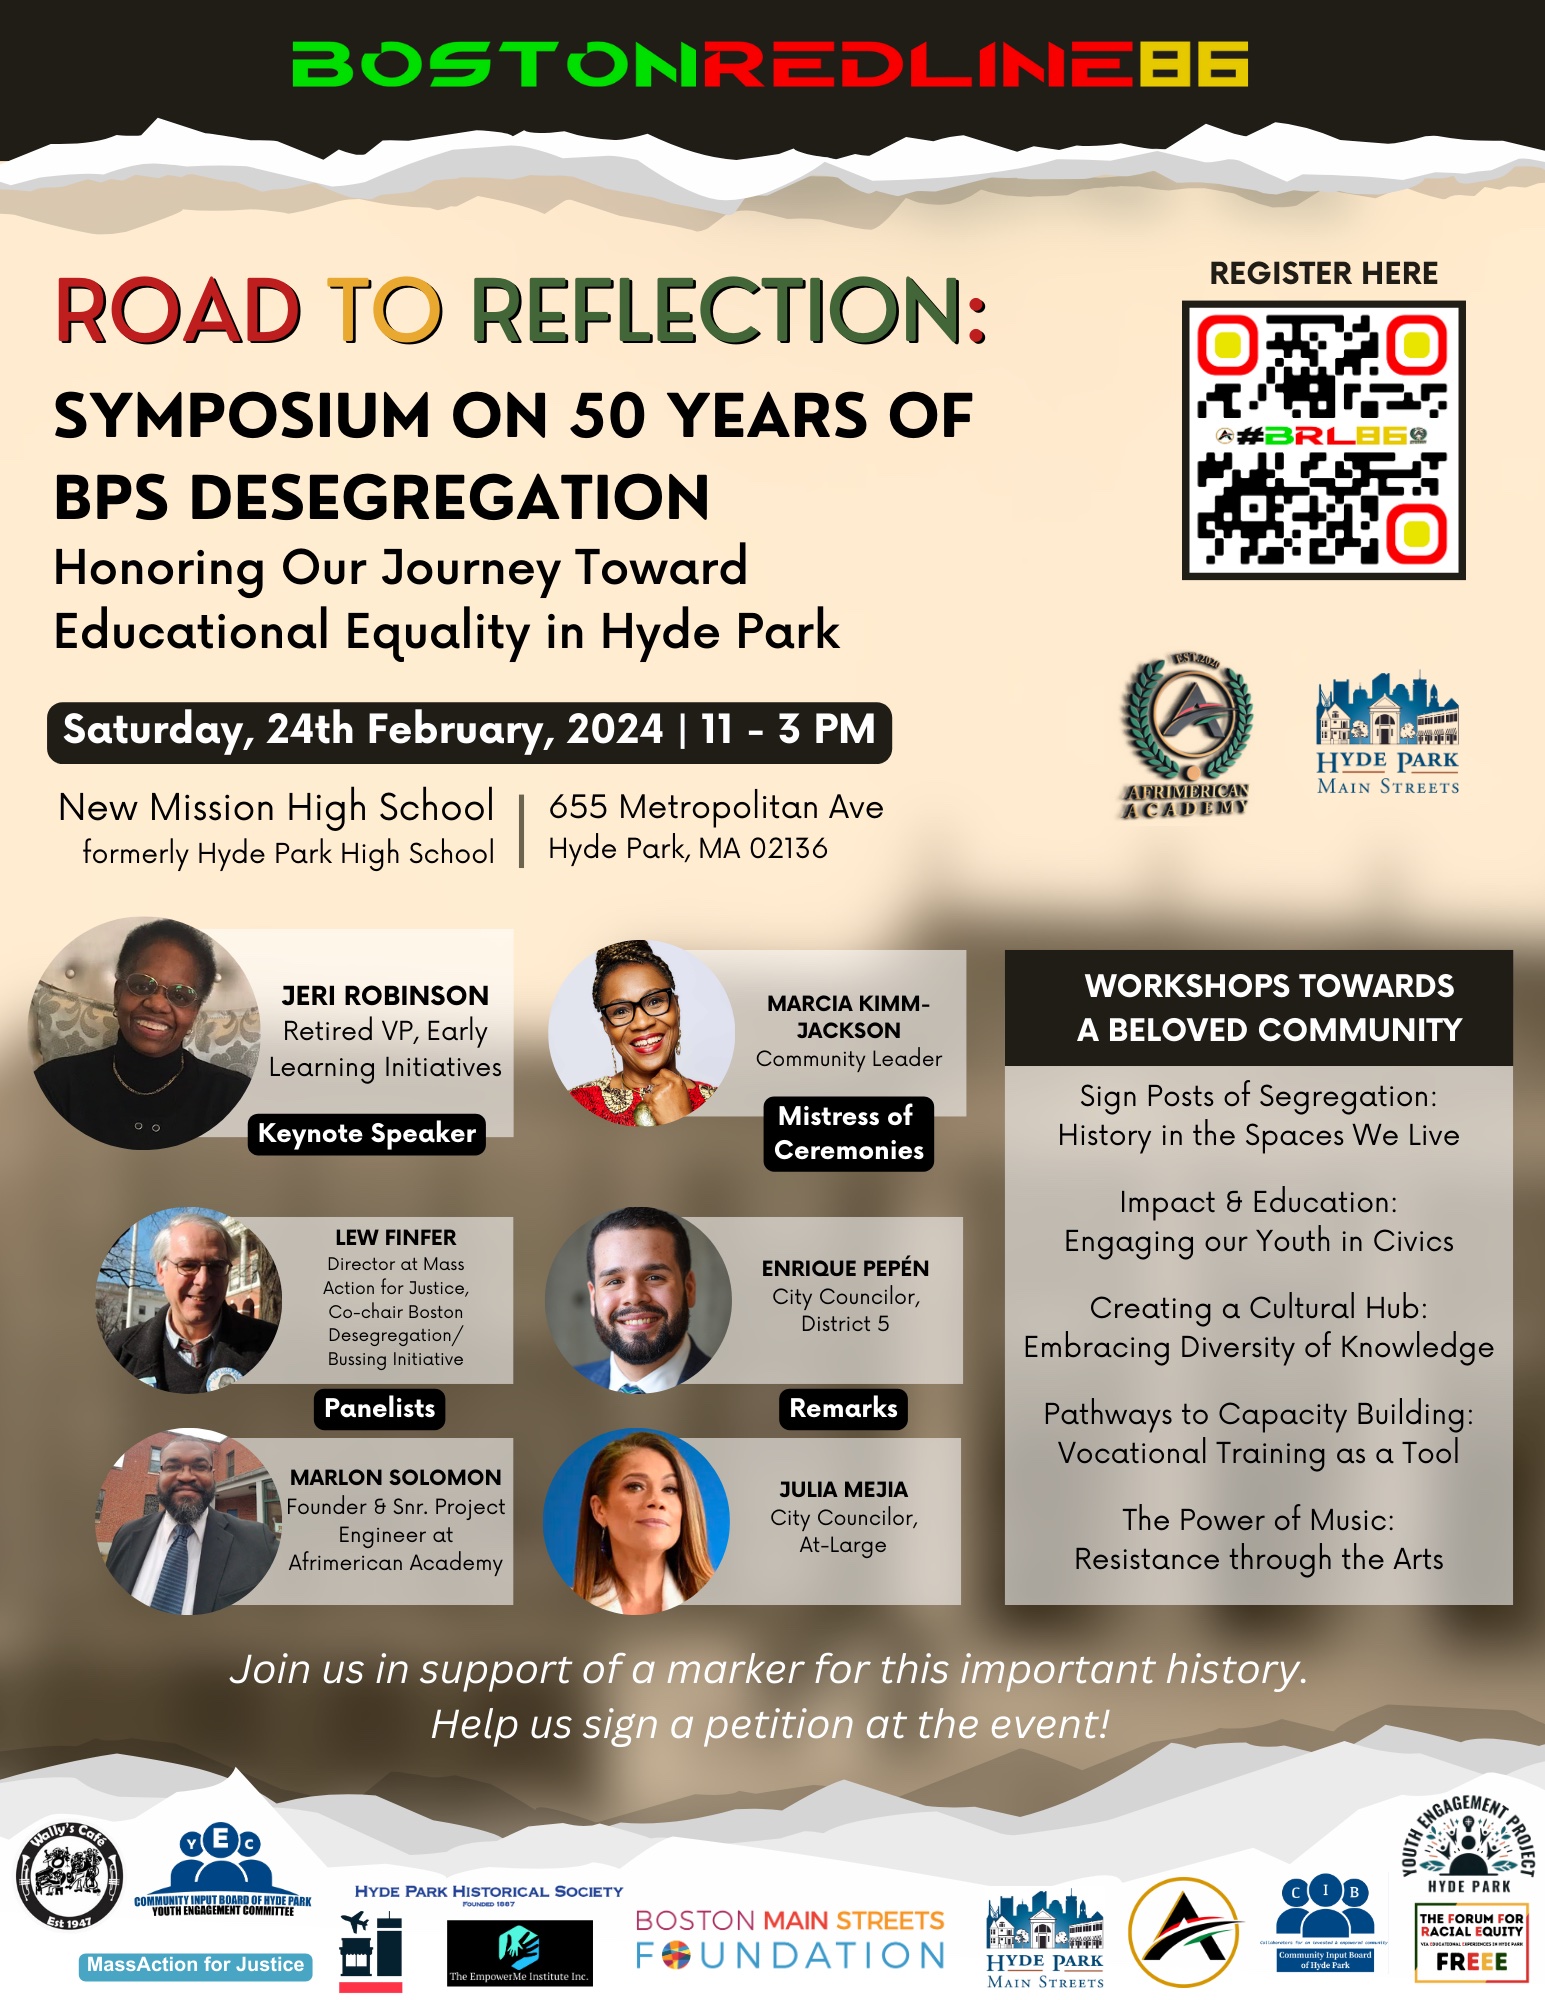 Road to Reflection: Symposium on 50 Years of BPS Desegregation